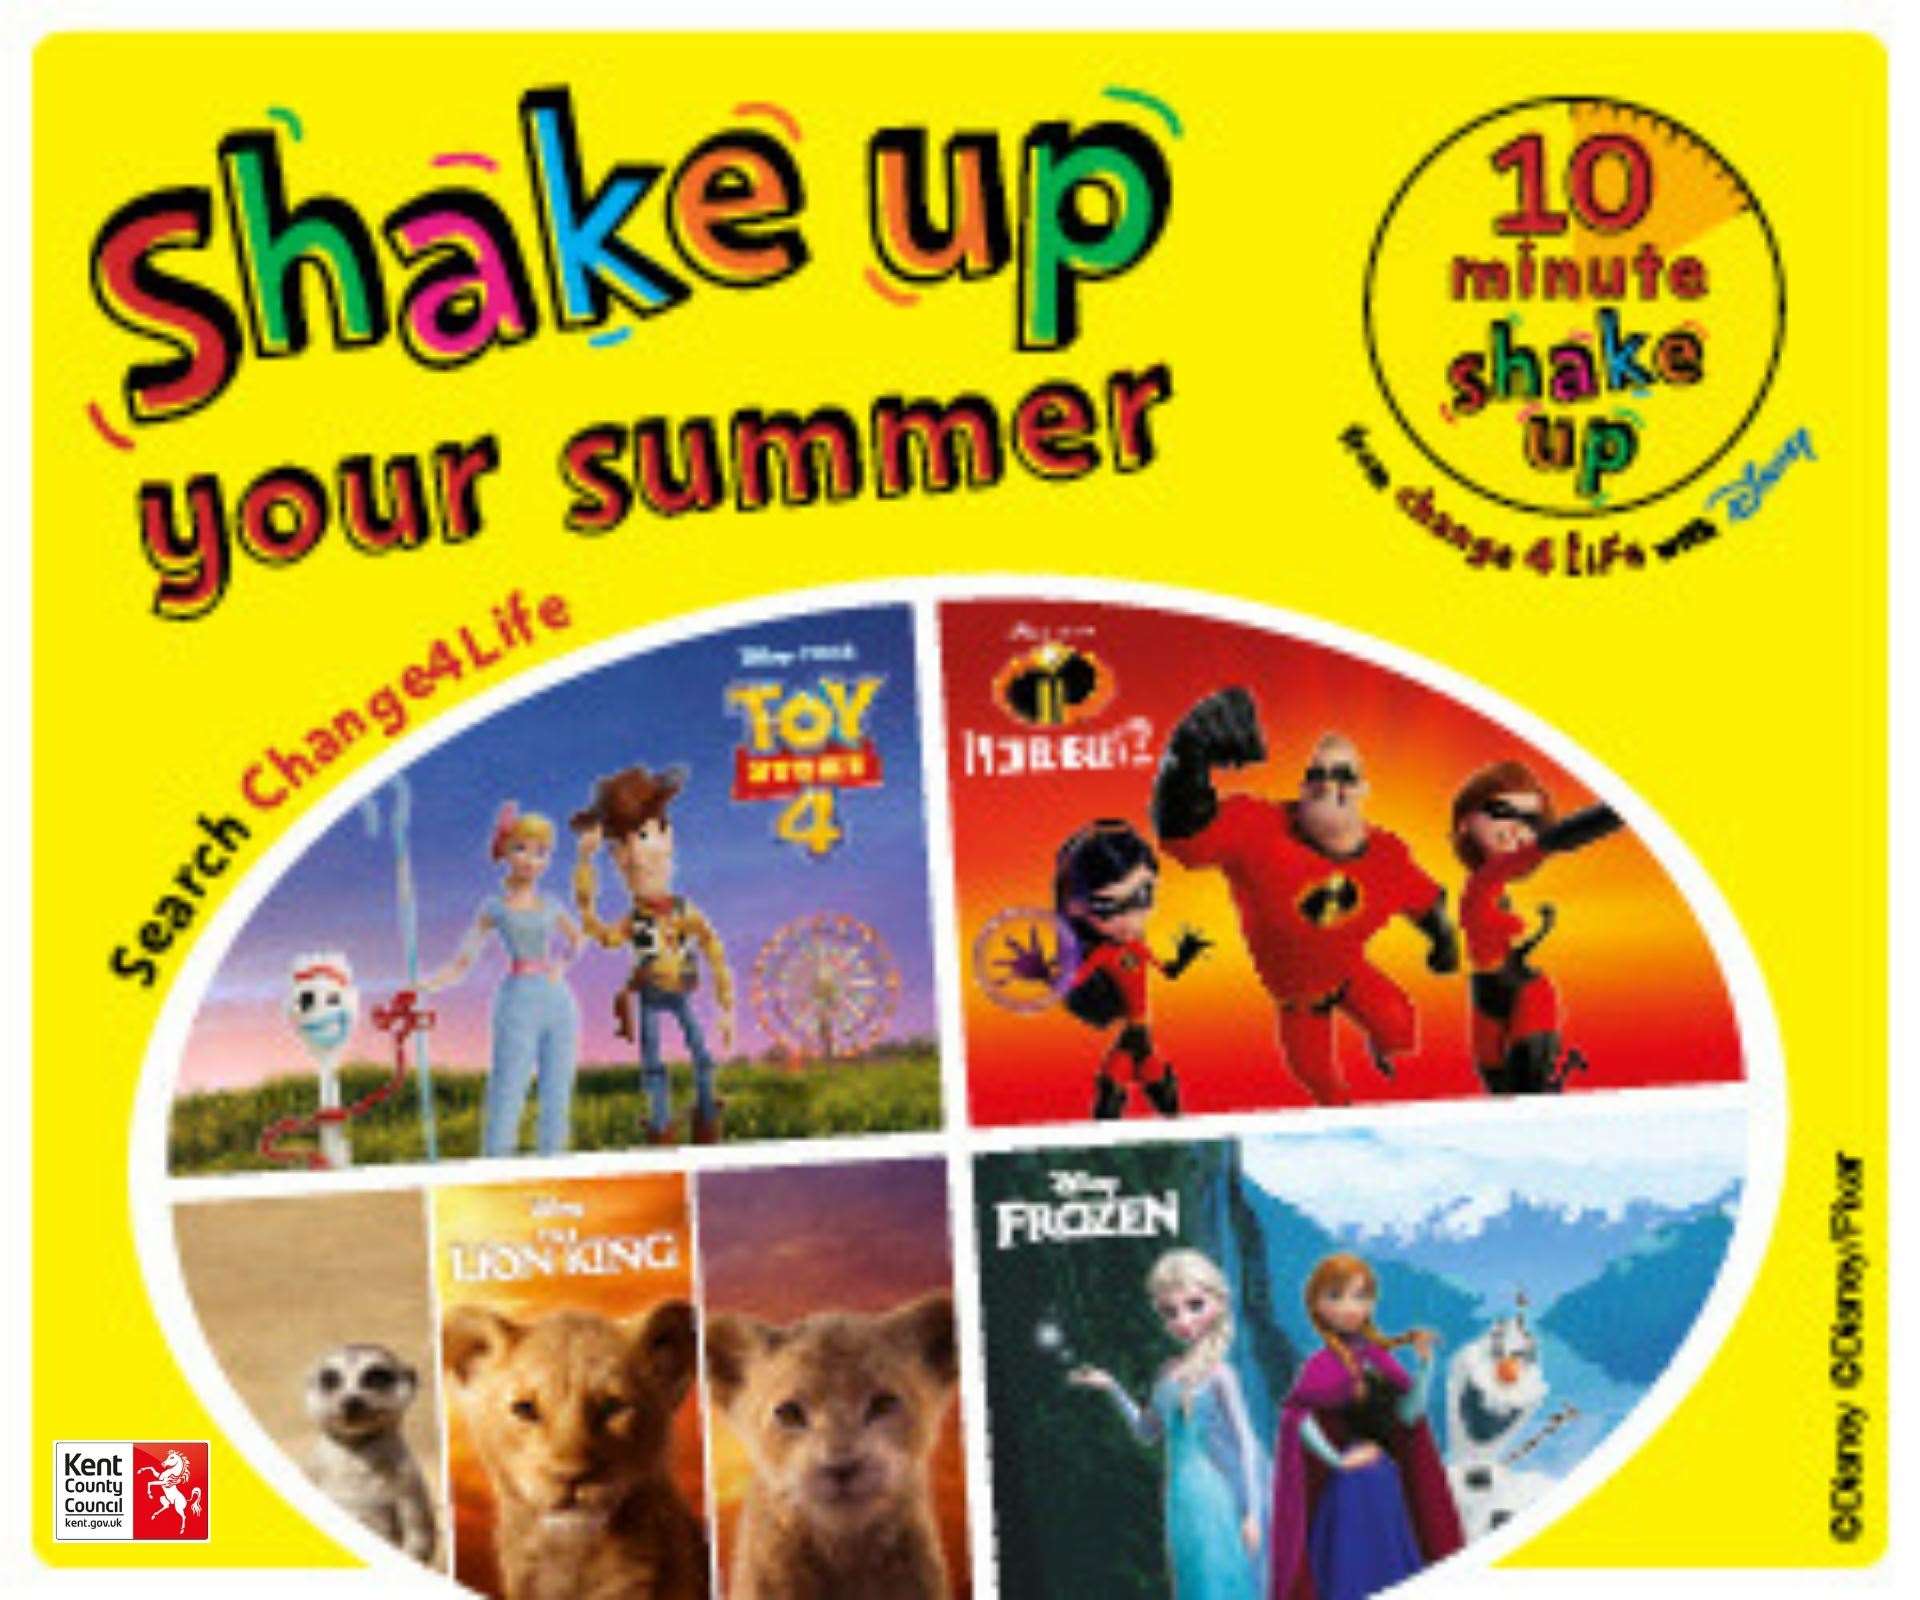 Change4Life and Disney have teamed up again to bring you new Shake Up games inspired by Disney and Pixar's Toy Story 4 and Incredibles 2, and Disney's The Lion King and Frozen.